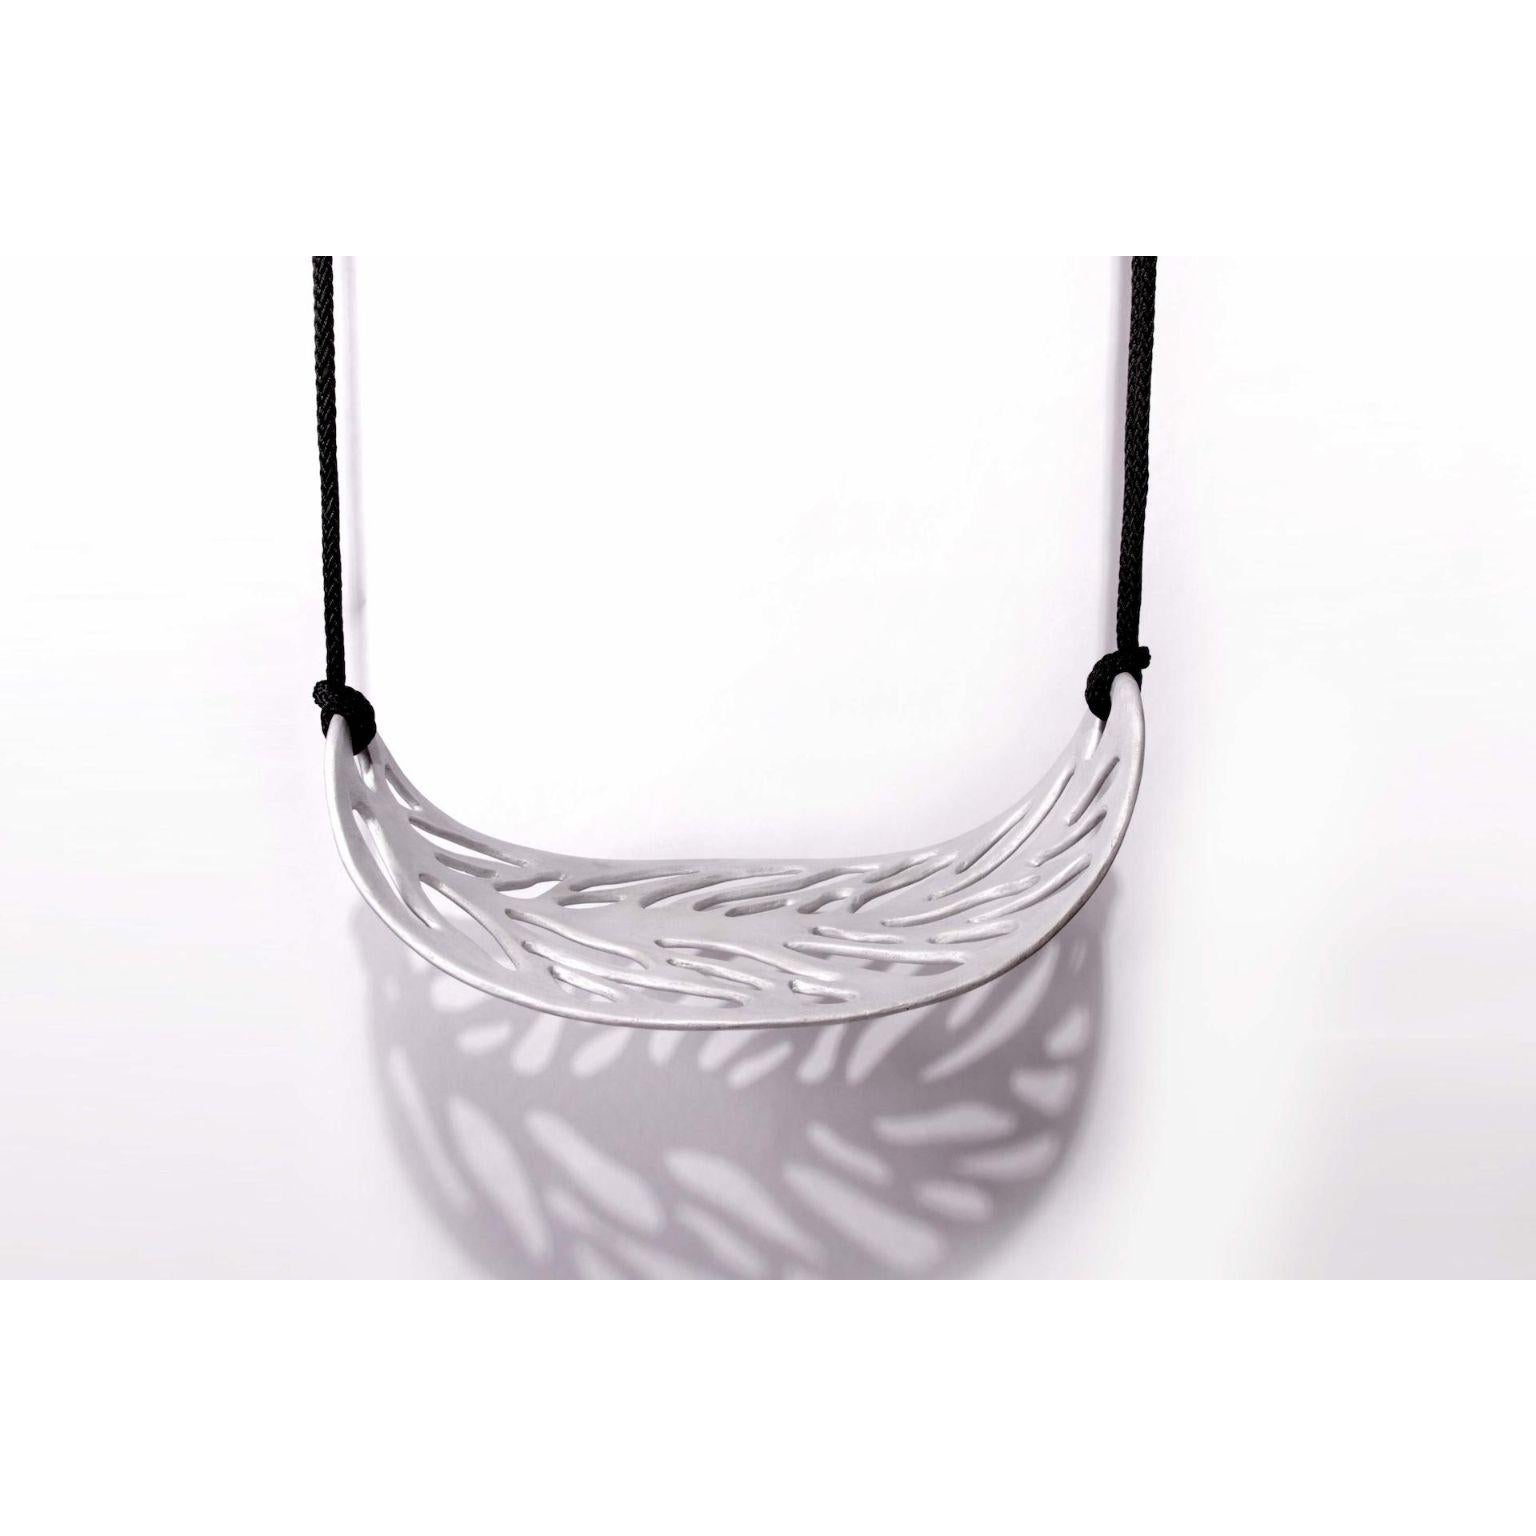 Autoumn leaf swing by Veronica Mar
Dimensions: D55 x W33 x H7 cm
Materials: Aluminium white lacquered
Weight: 3 kg.
Numbered and limited edition to 88 pieces.

Also available in different materials and finishes. 

IInspired by the falling